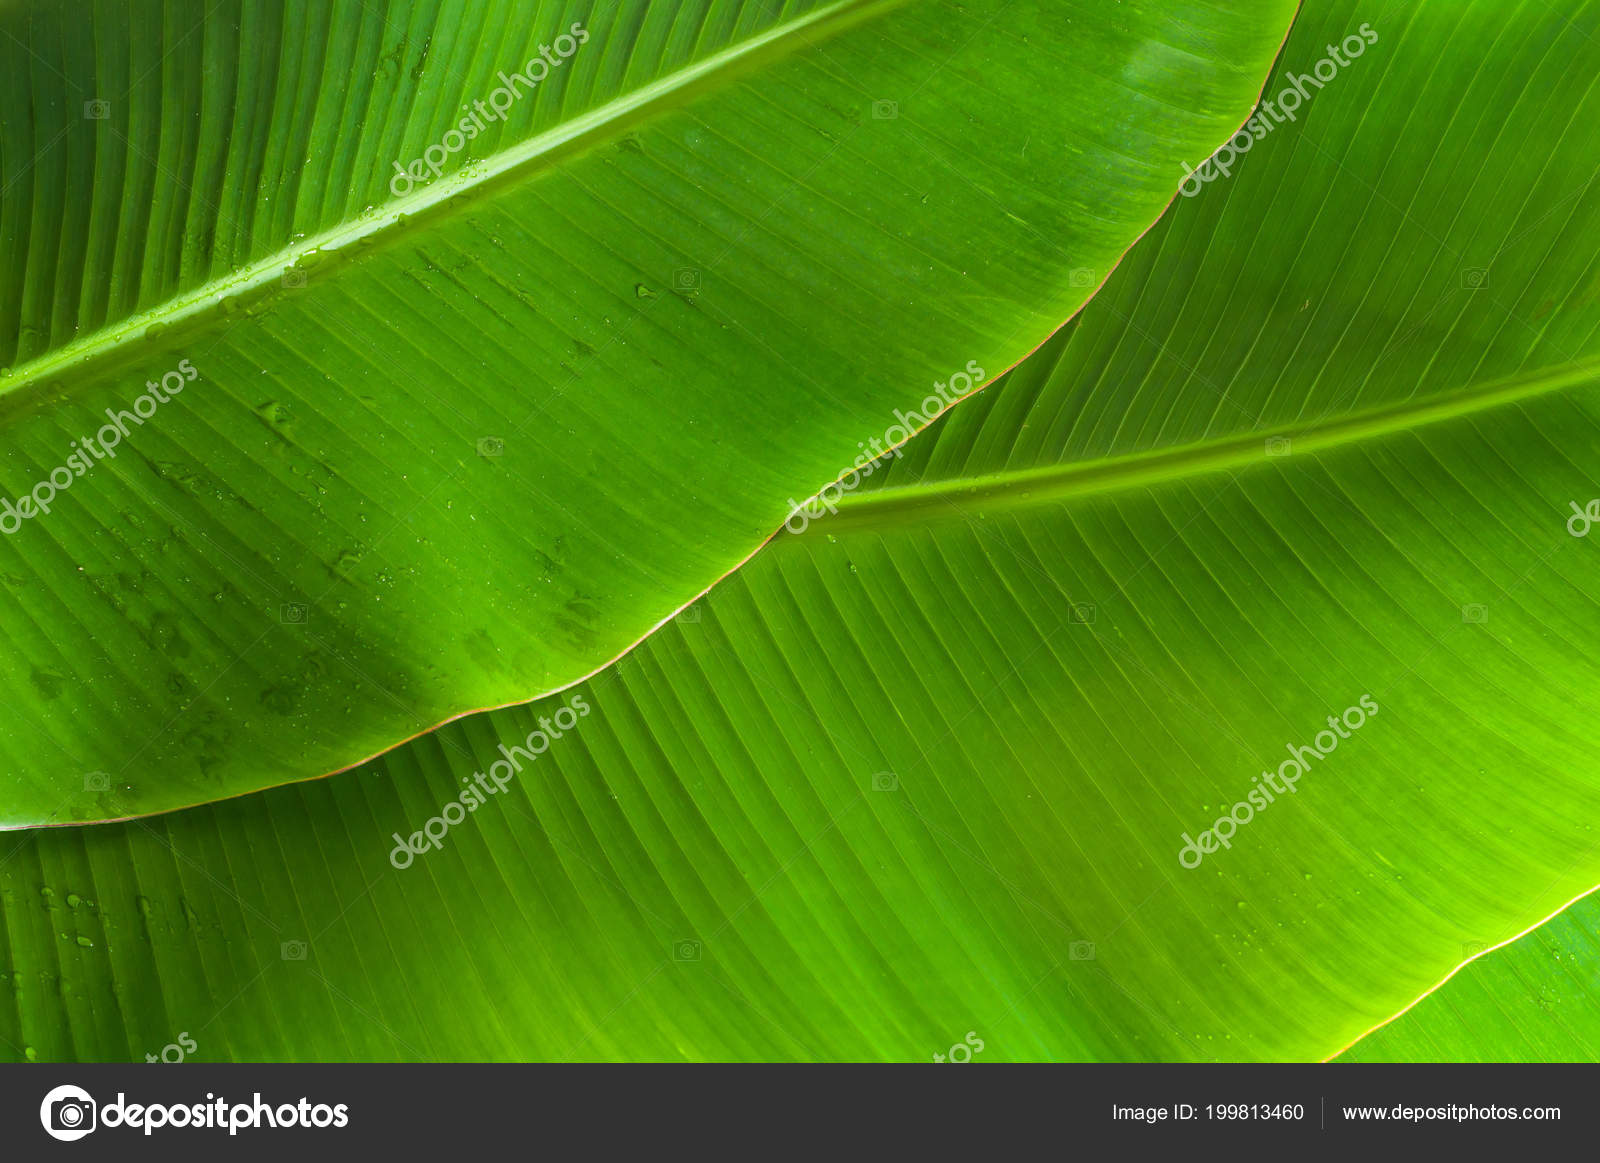 Textured Green Banana Leaves Background Stock Photo by ©gluber 199813460